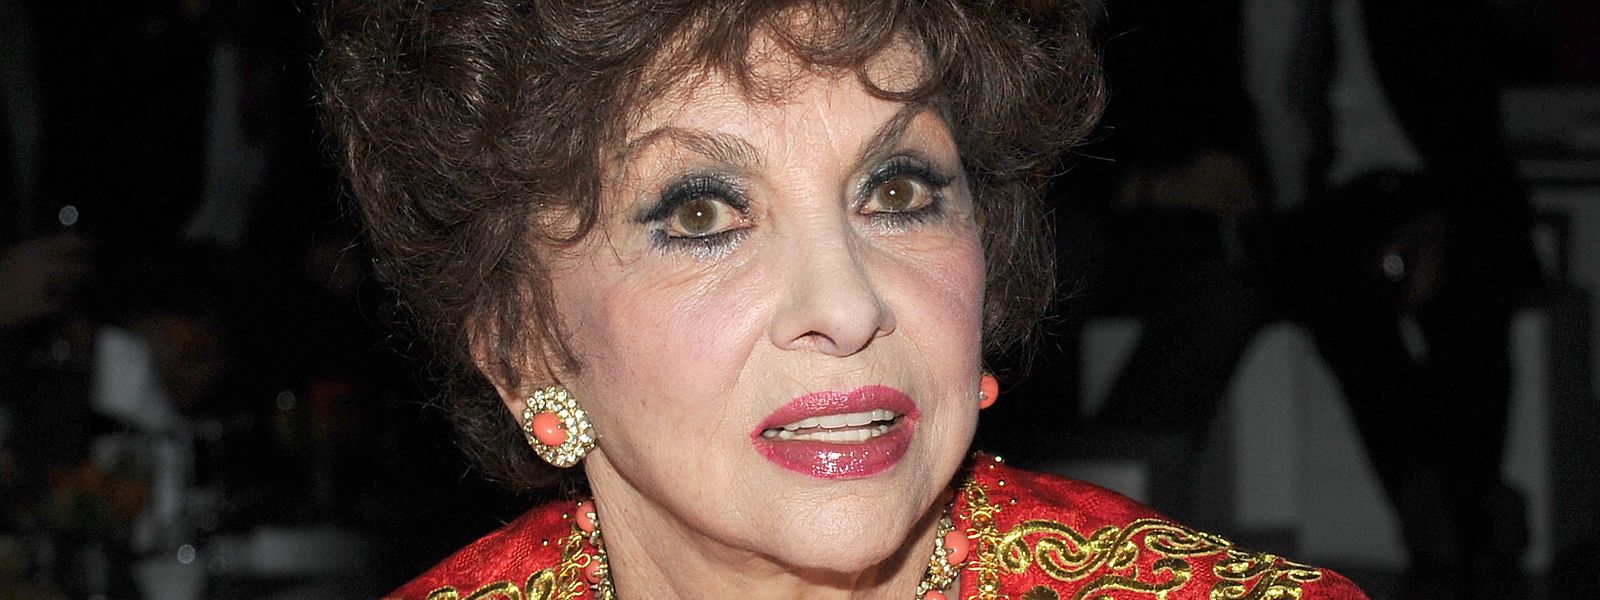 Italian actress Gina Lollobrigida, has died at the age of 95